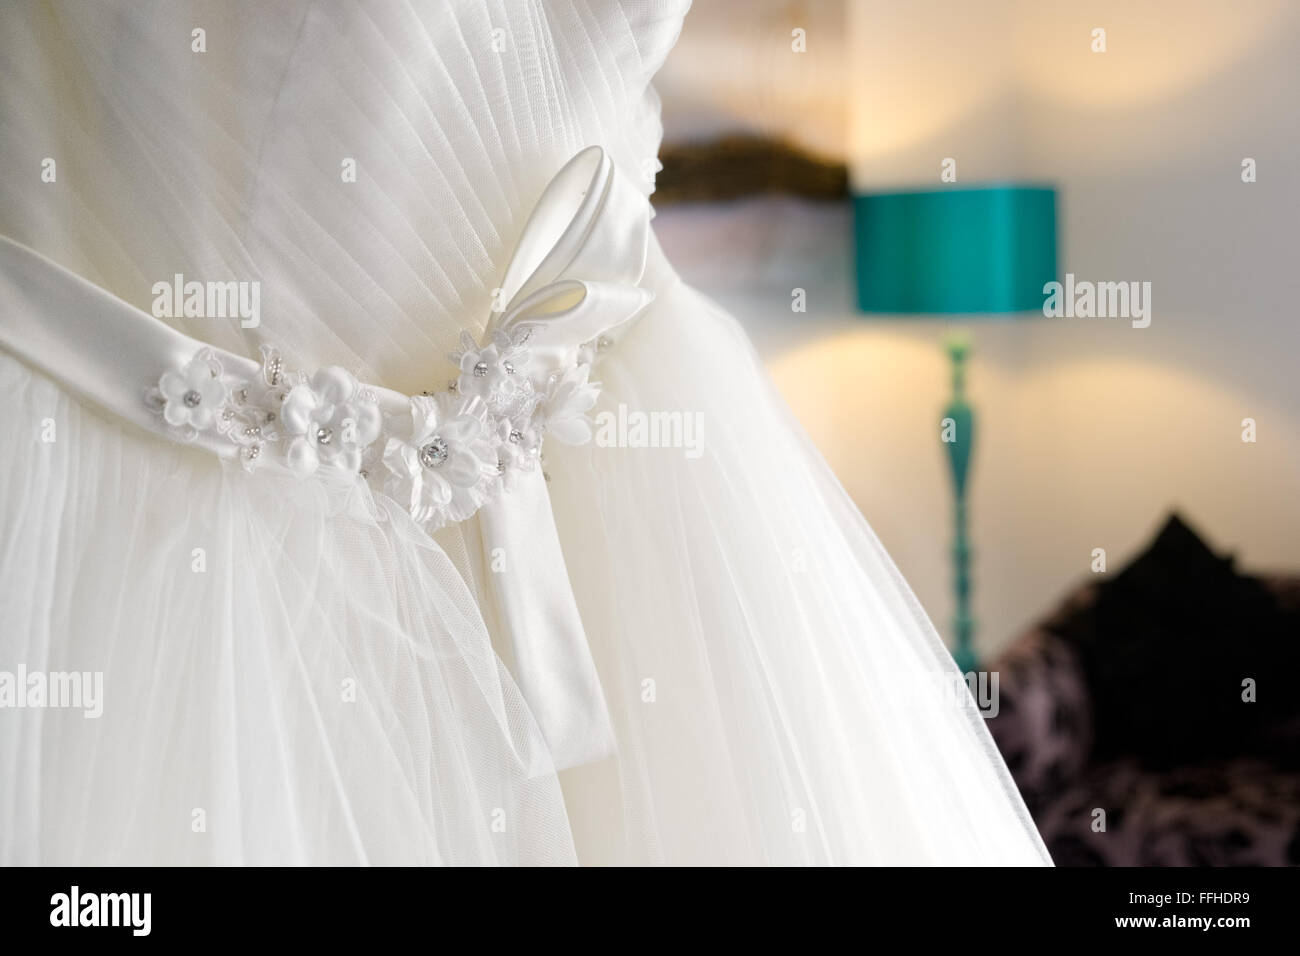 A traditional white wedding dress hanging in a bedroom waiting for a bride to put it on Stock Photo